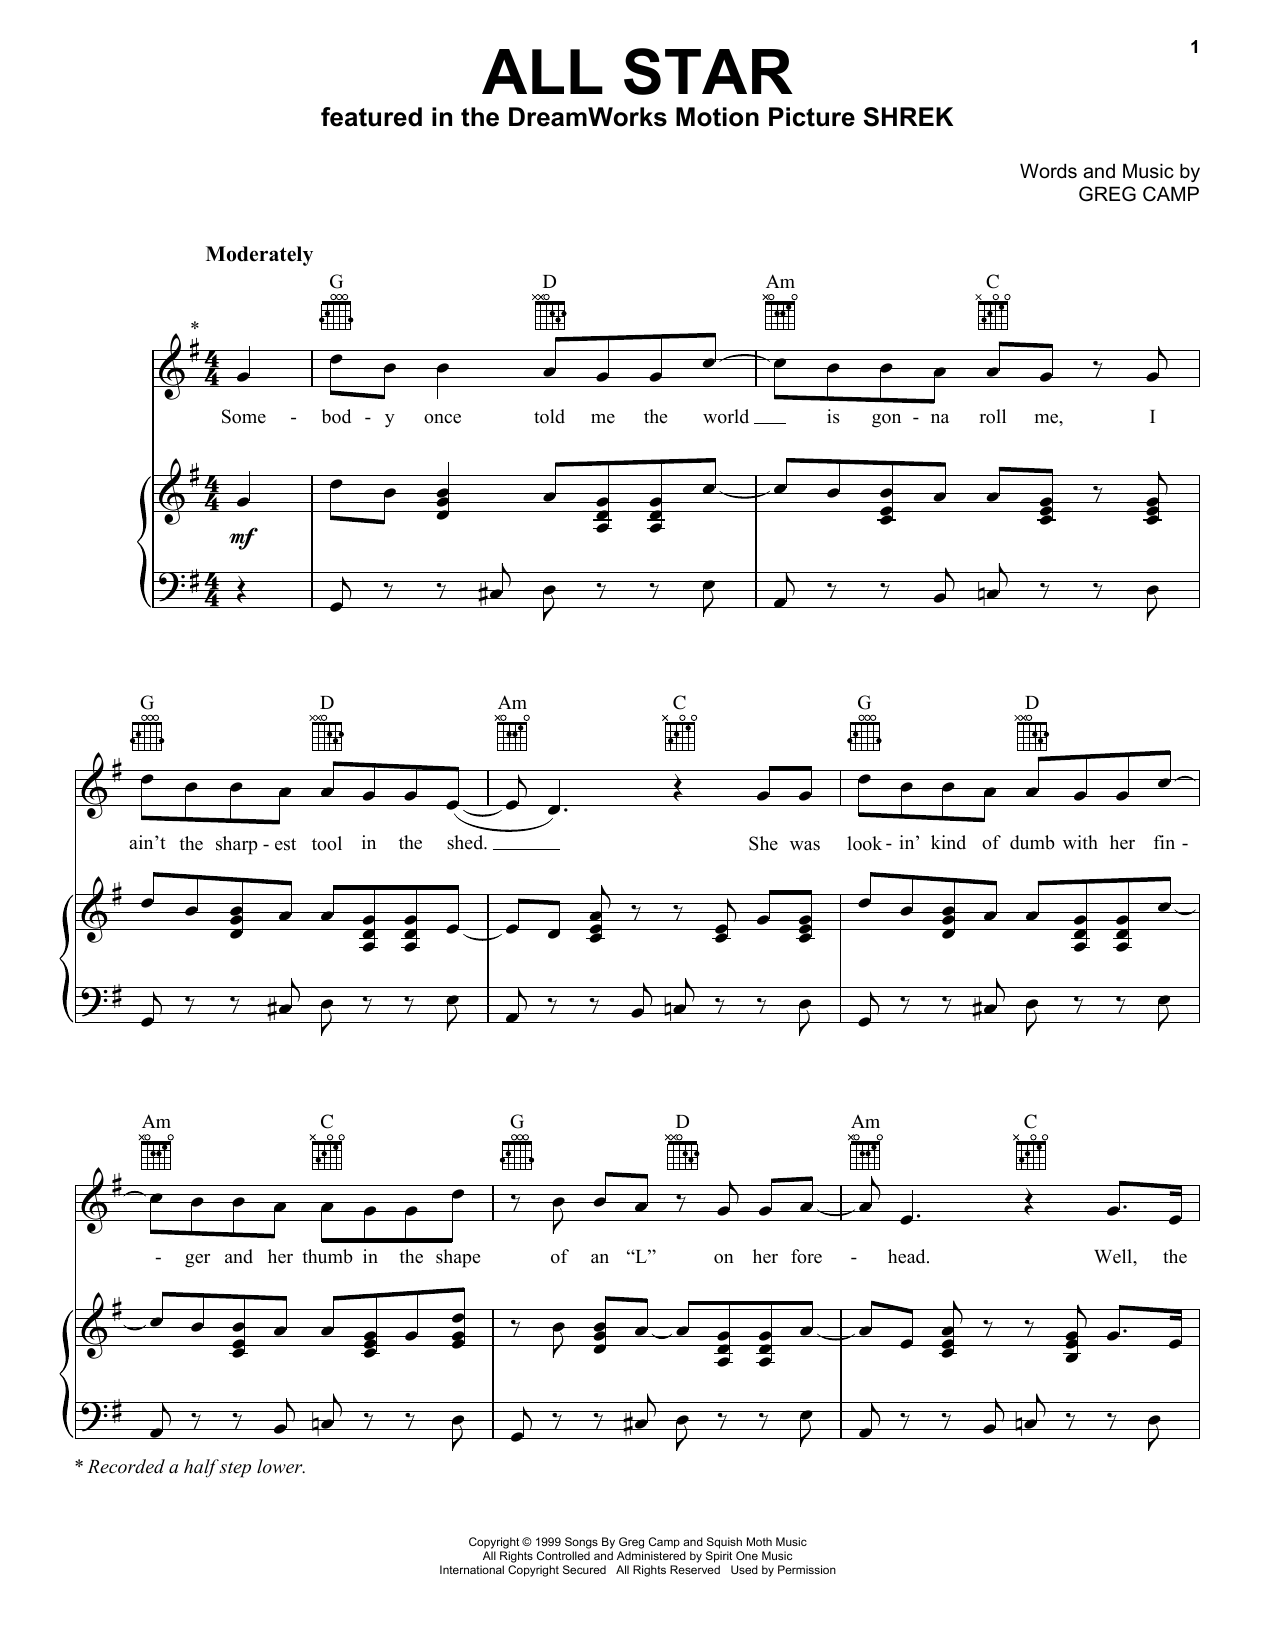 Download Smash Mouth All Star Sheet Music